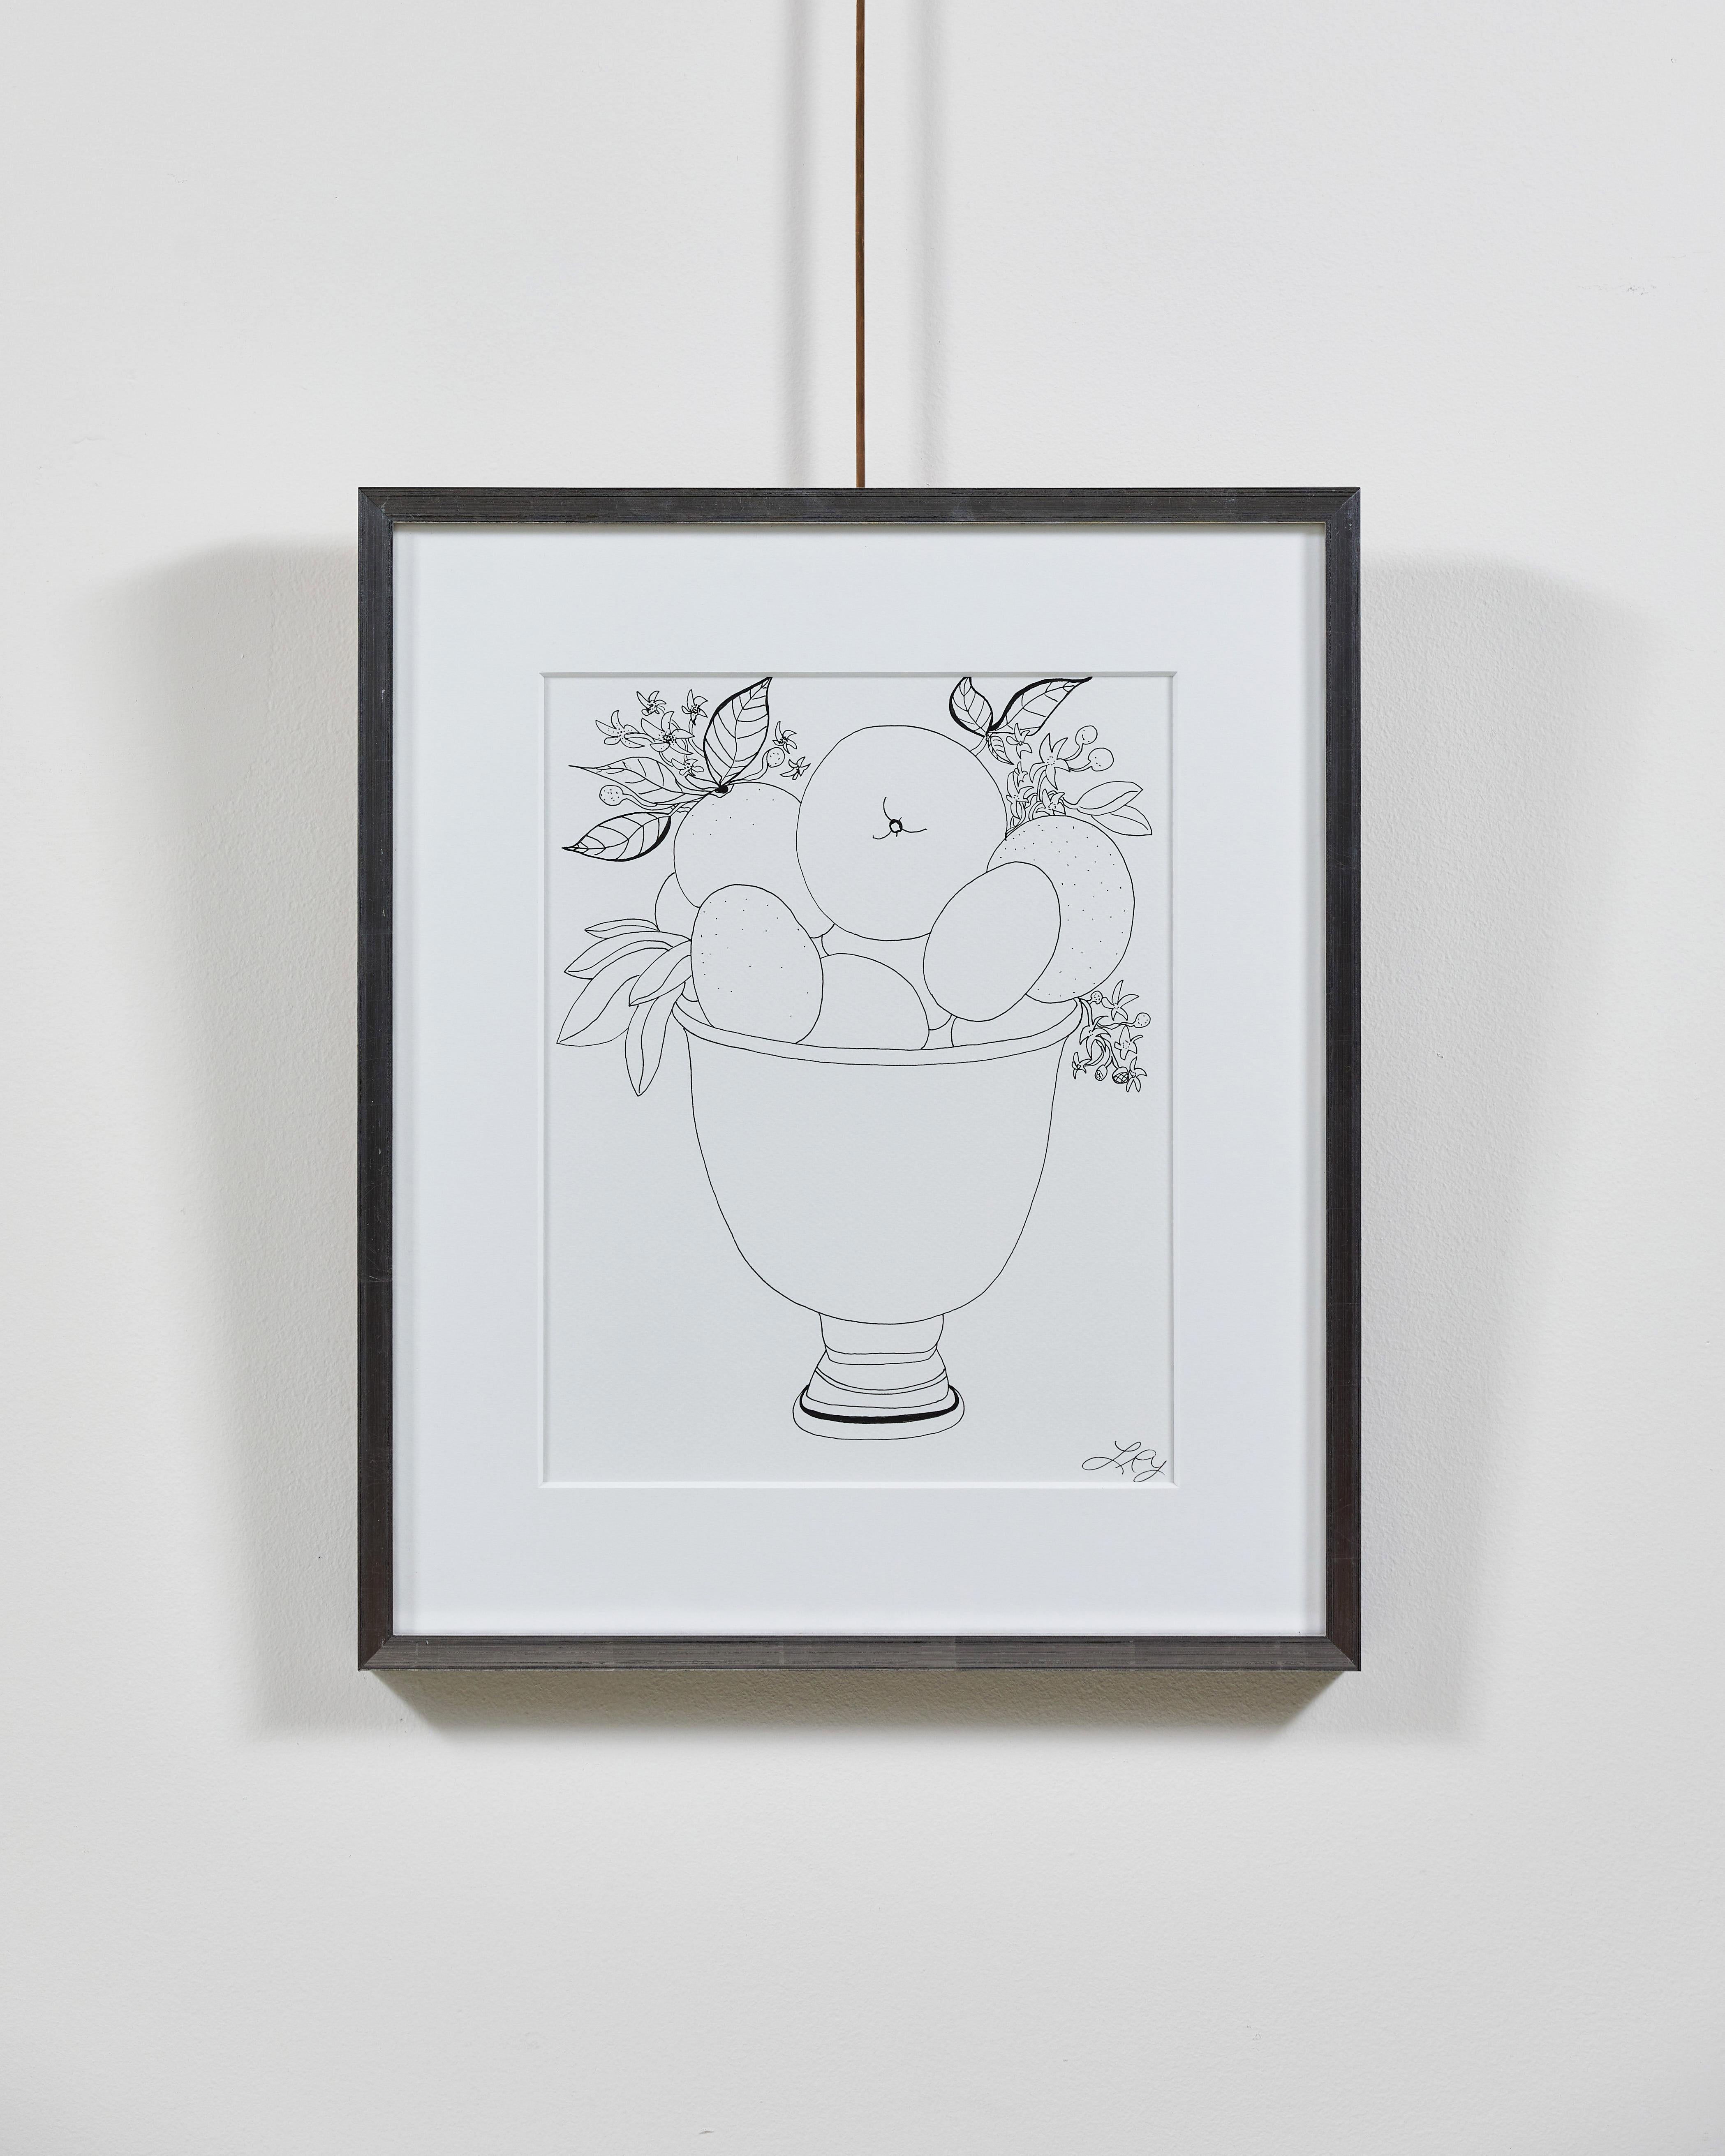 Liz Young, still life drawing of a bowl of fruit in a footed bowl, ink on paper

About the artist:
Liz Young is a botanical artist who lives in Los Angeles, California. Her ink on paper original drawings study flora, fruit, arrangements and